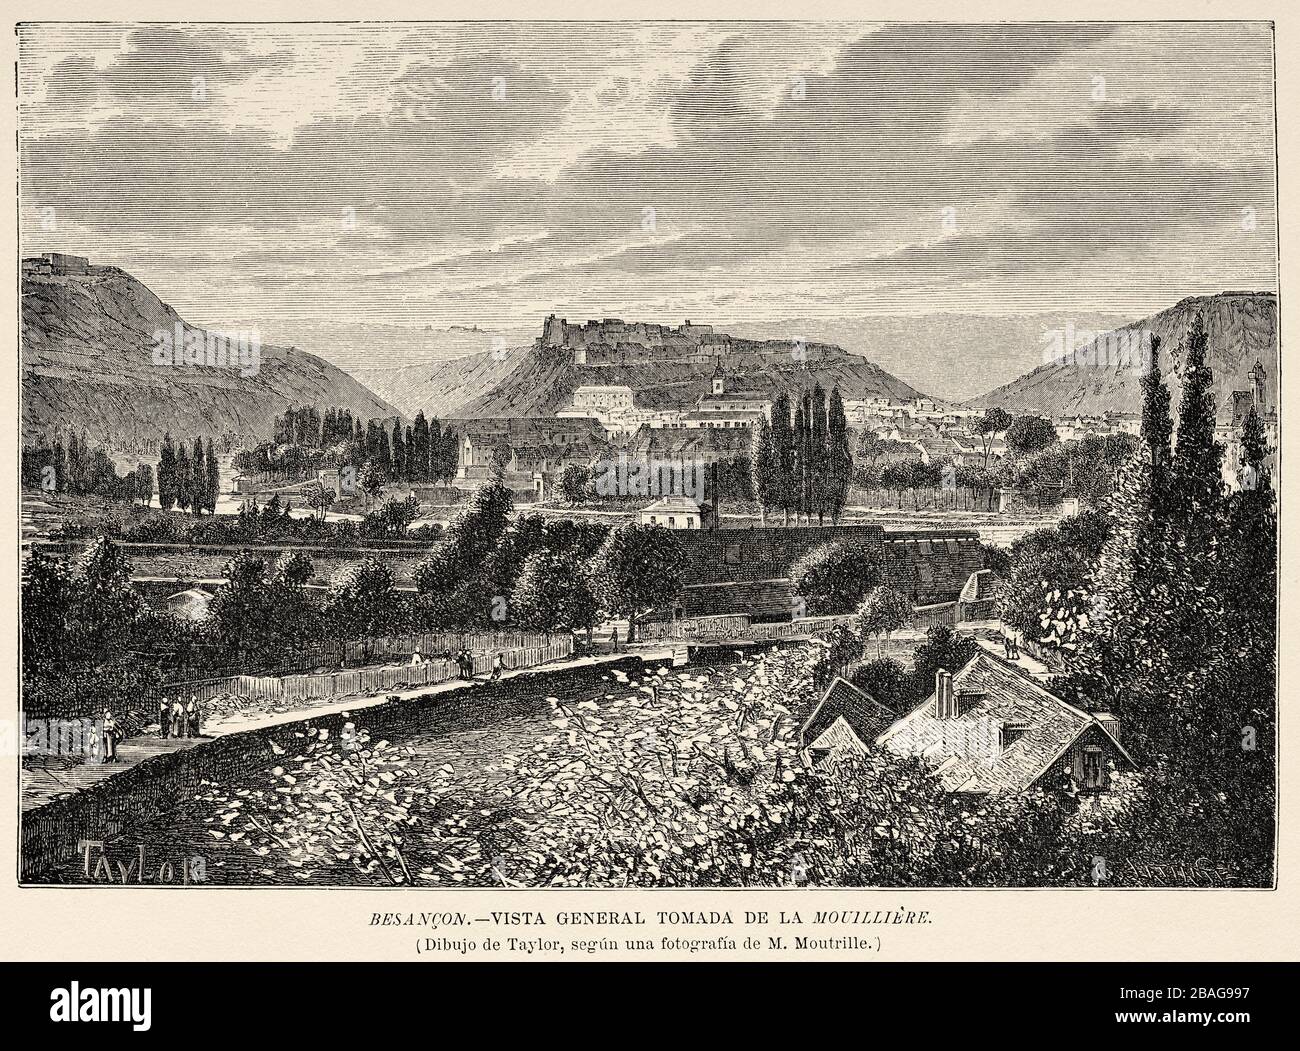 General panoramic view of Besancon and the Citadel above River Doubs. France Europe. Old 19th century engraved illustration image from the book Stock Photo